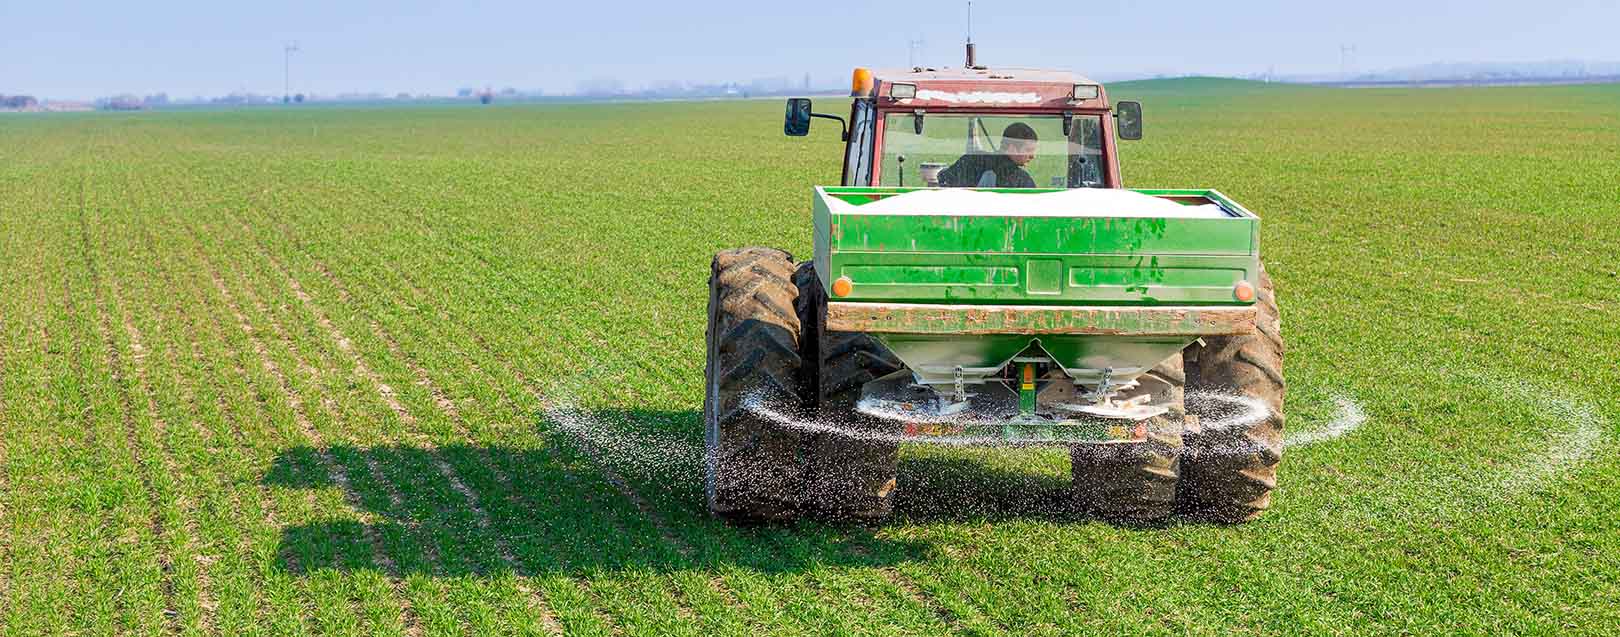 India’s urea imports decline 23% in April-May